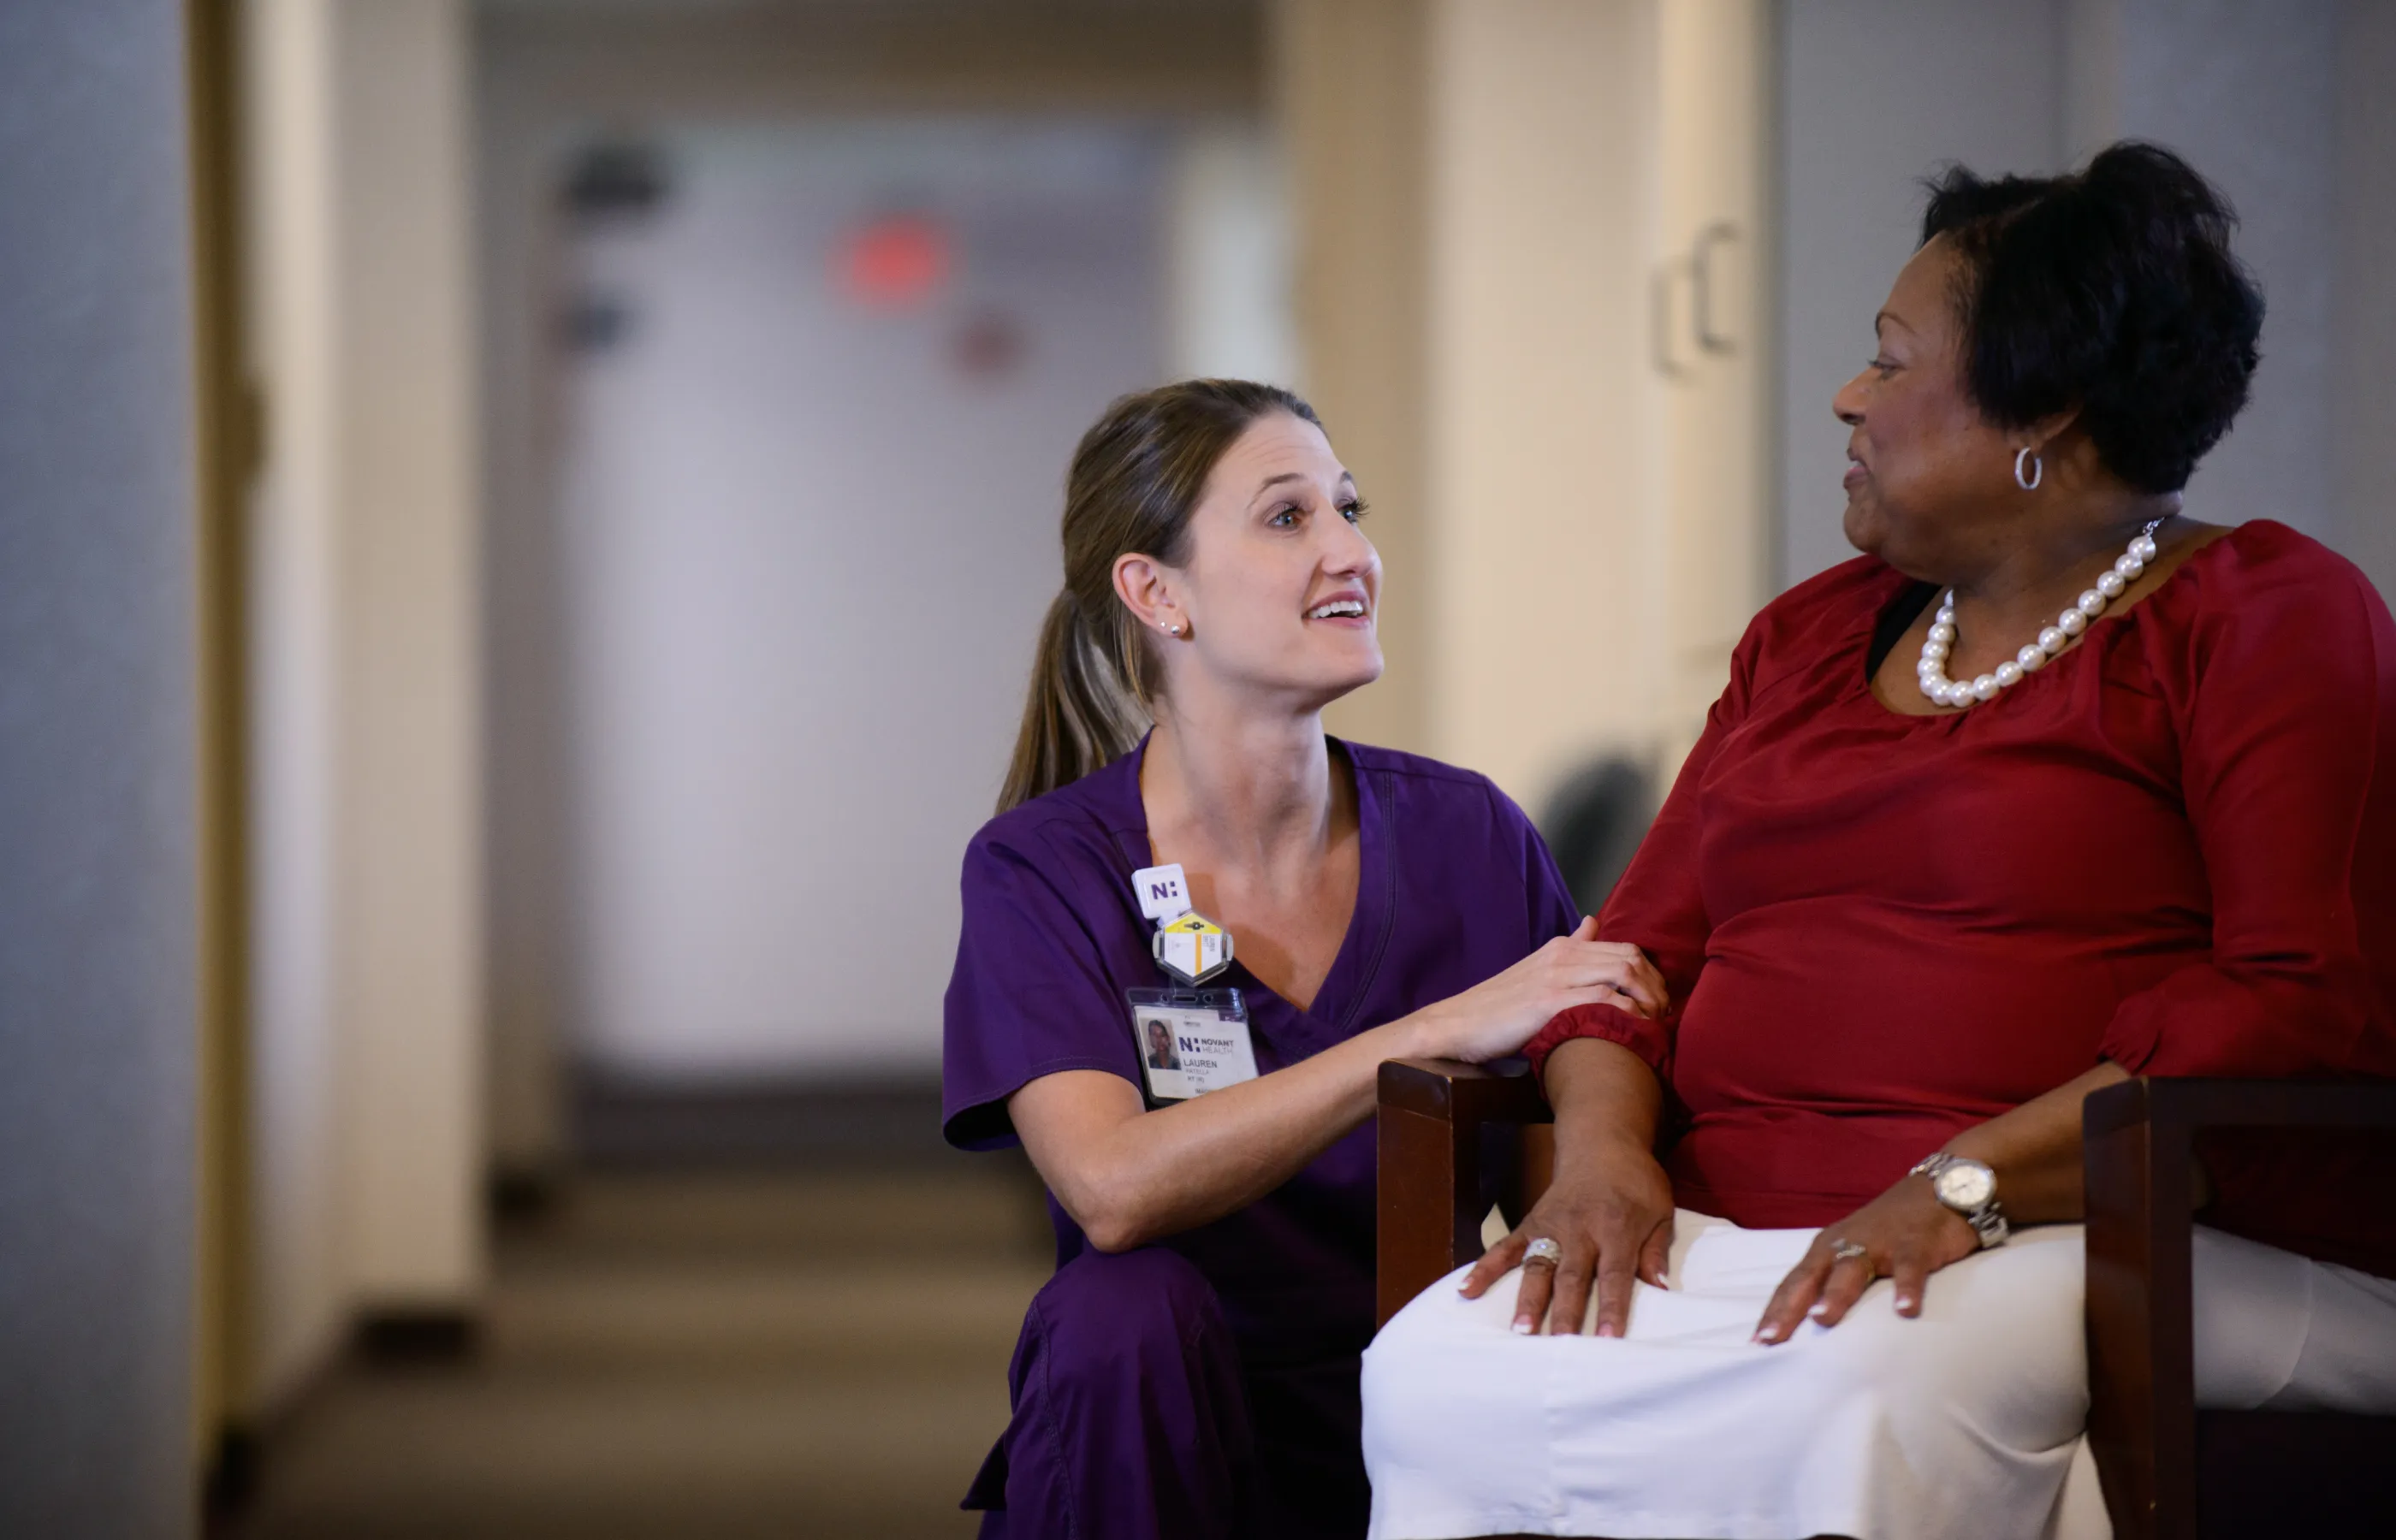 A Novant Health team member is kneeling next to a patient as she talks with her. The patient is looking down and smiling at the team member. 